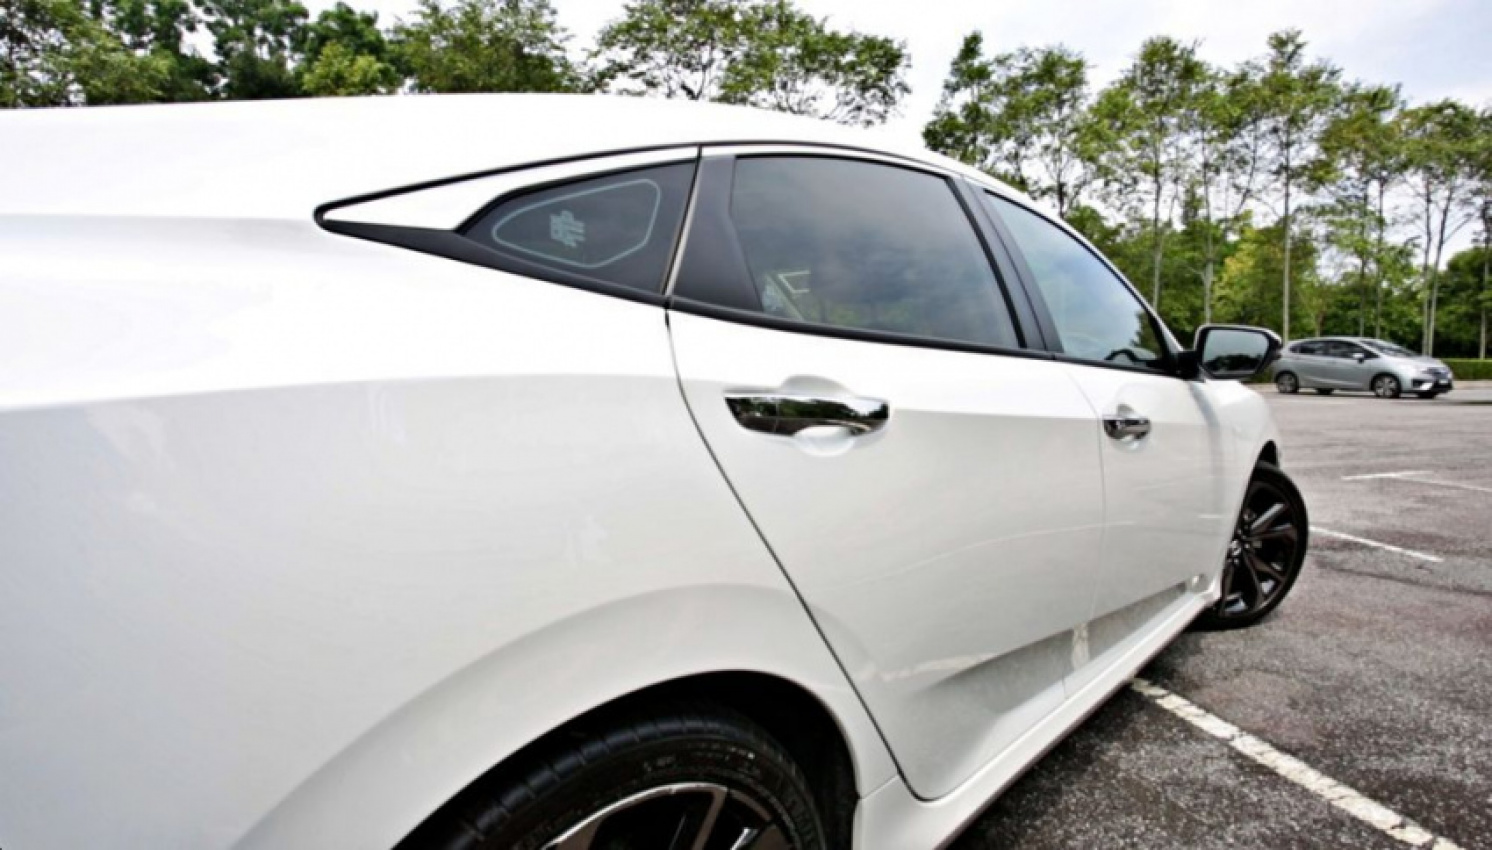 autos, cars, honda, reviews, 1.5 tc-p, android, c-segment, civic, facelift, fc, honda civic, malaysia, michelin, pilot sport 4, review, vtec turbo, android, review: 2021 honda civic 1.5 tc-p - where do we go from here?